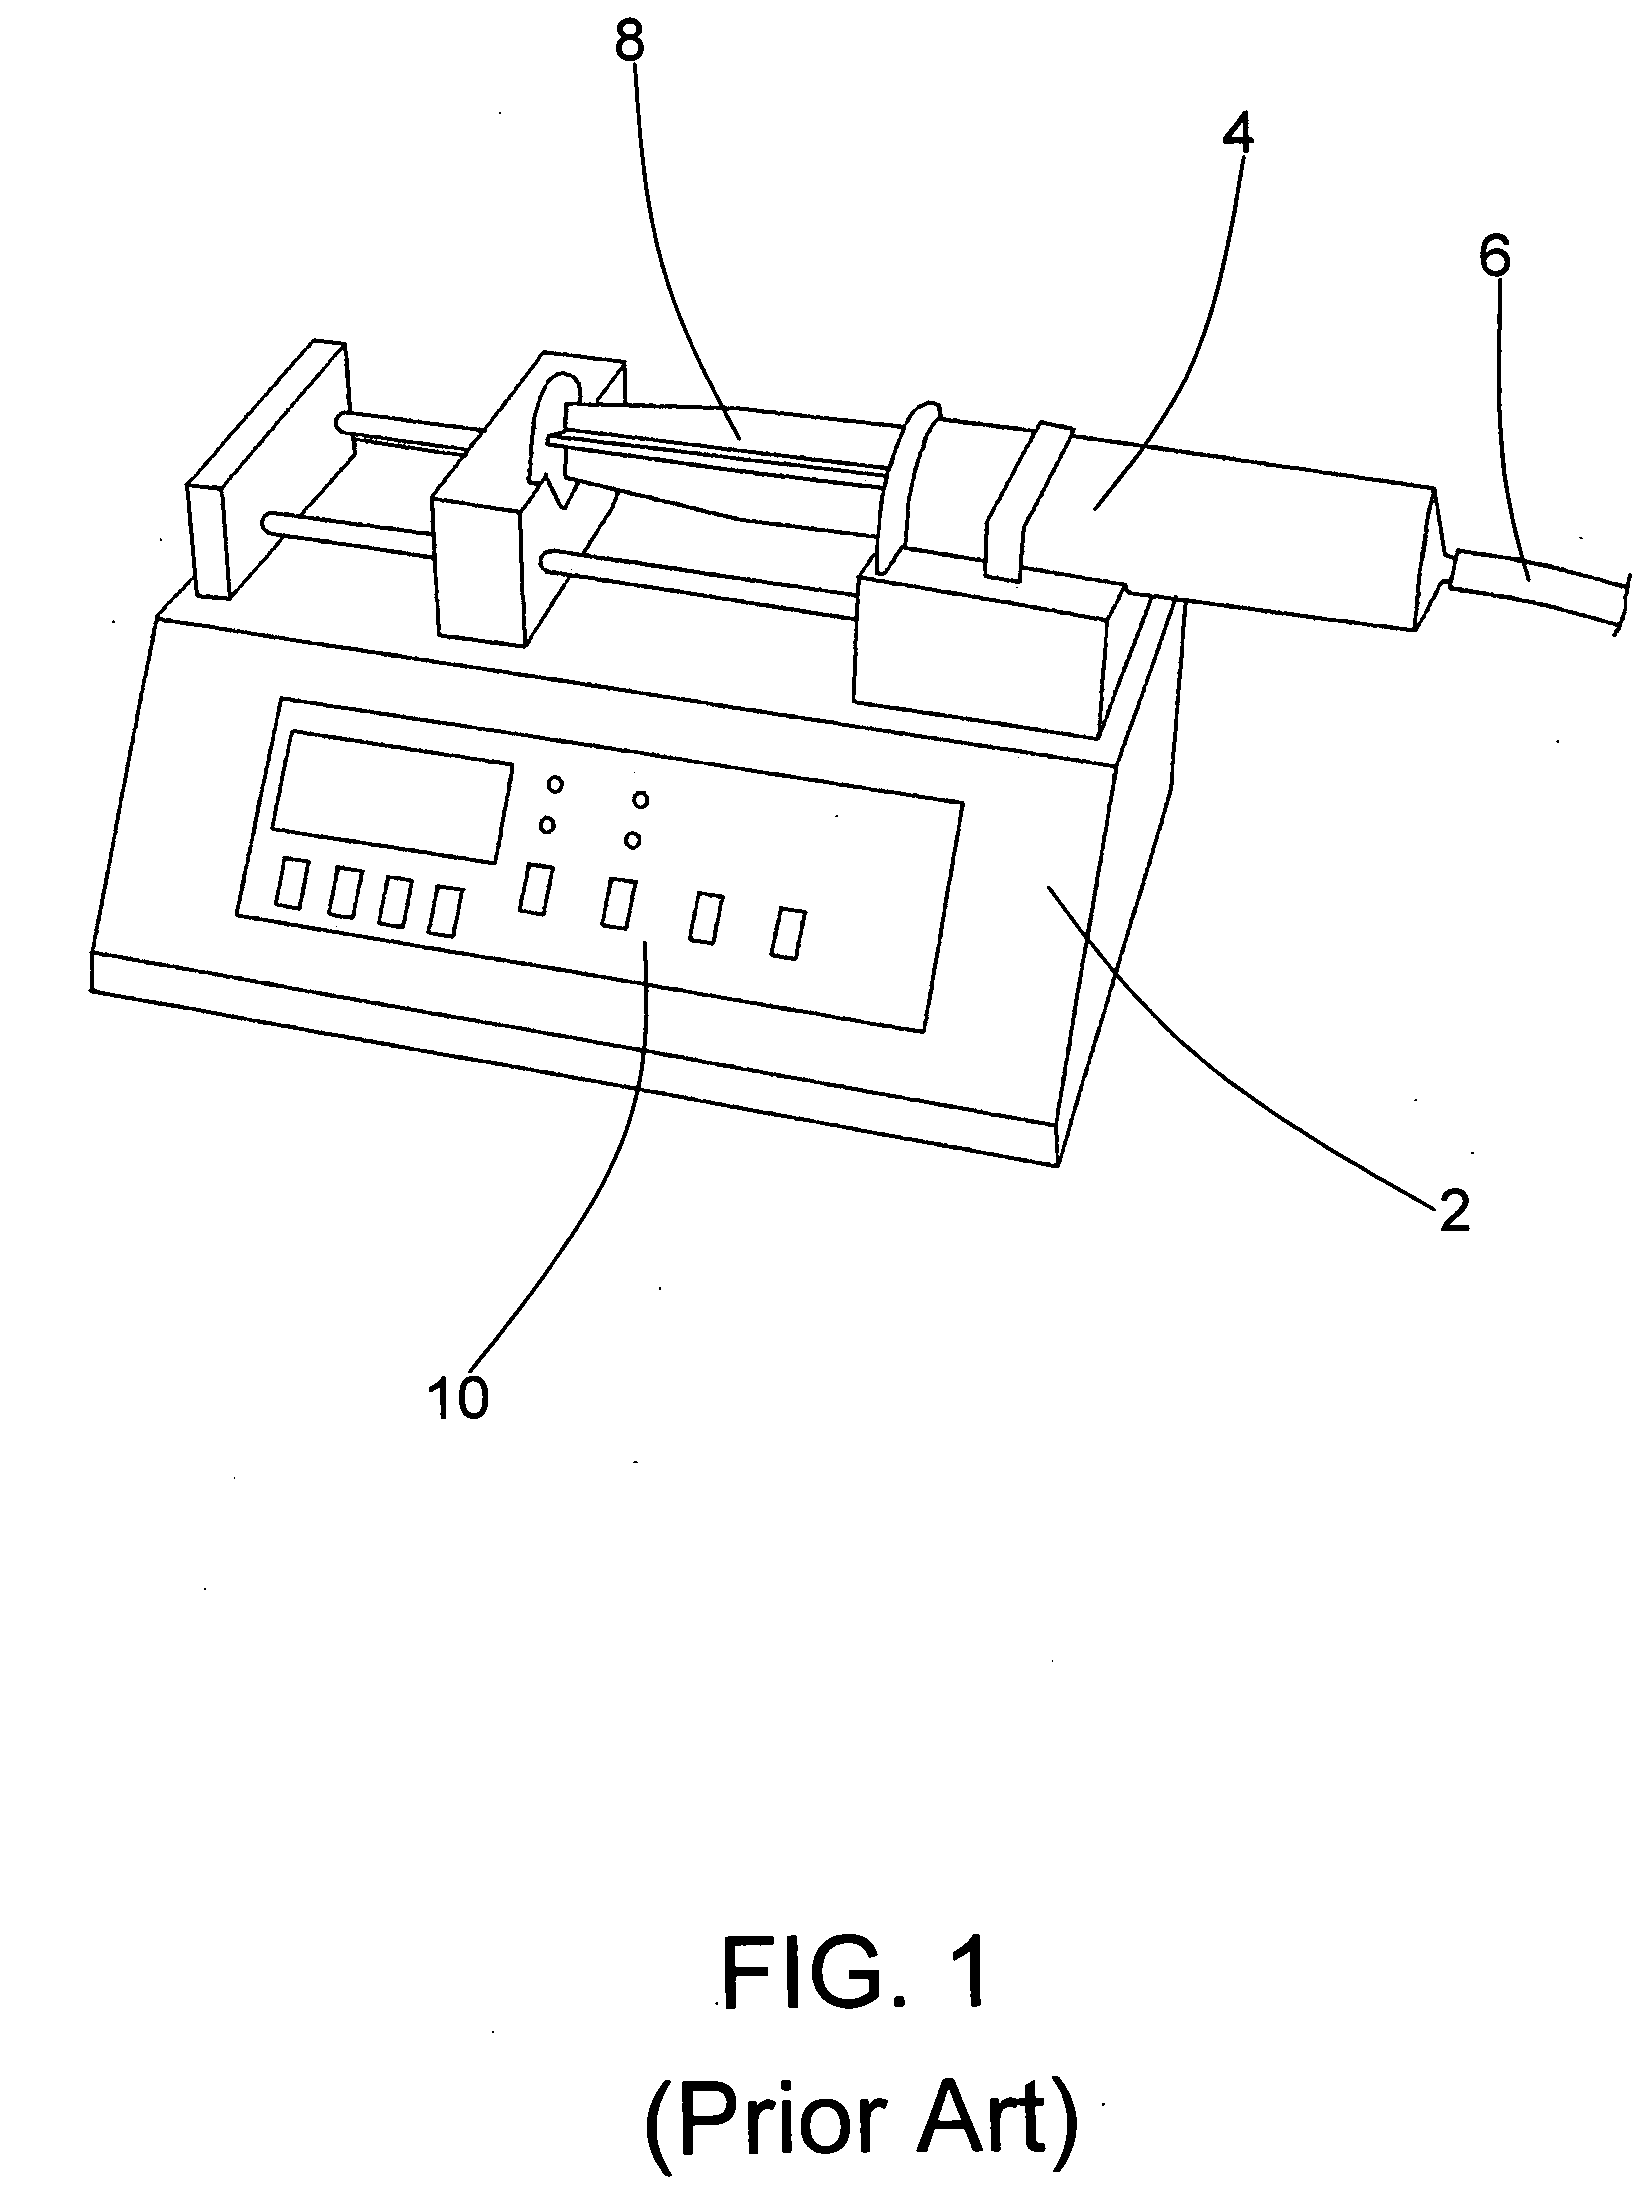 Method and apparatus for controlled feeding of an infant